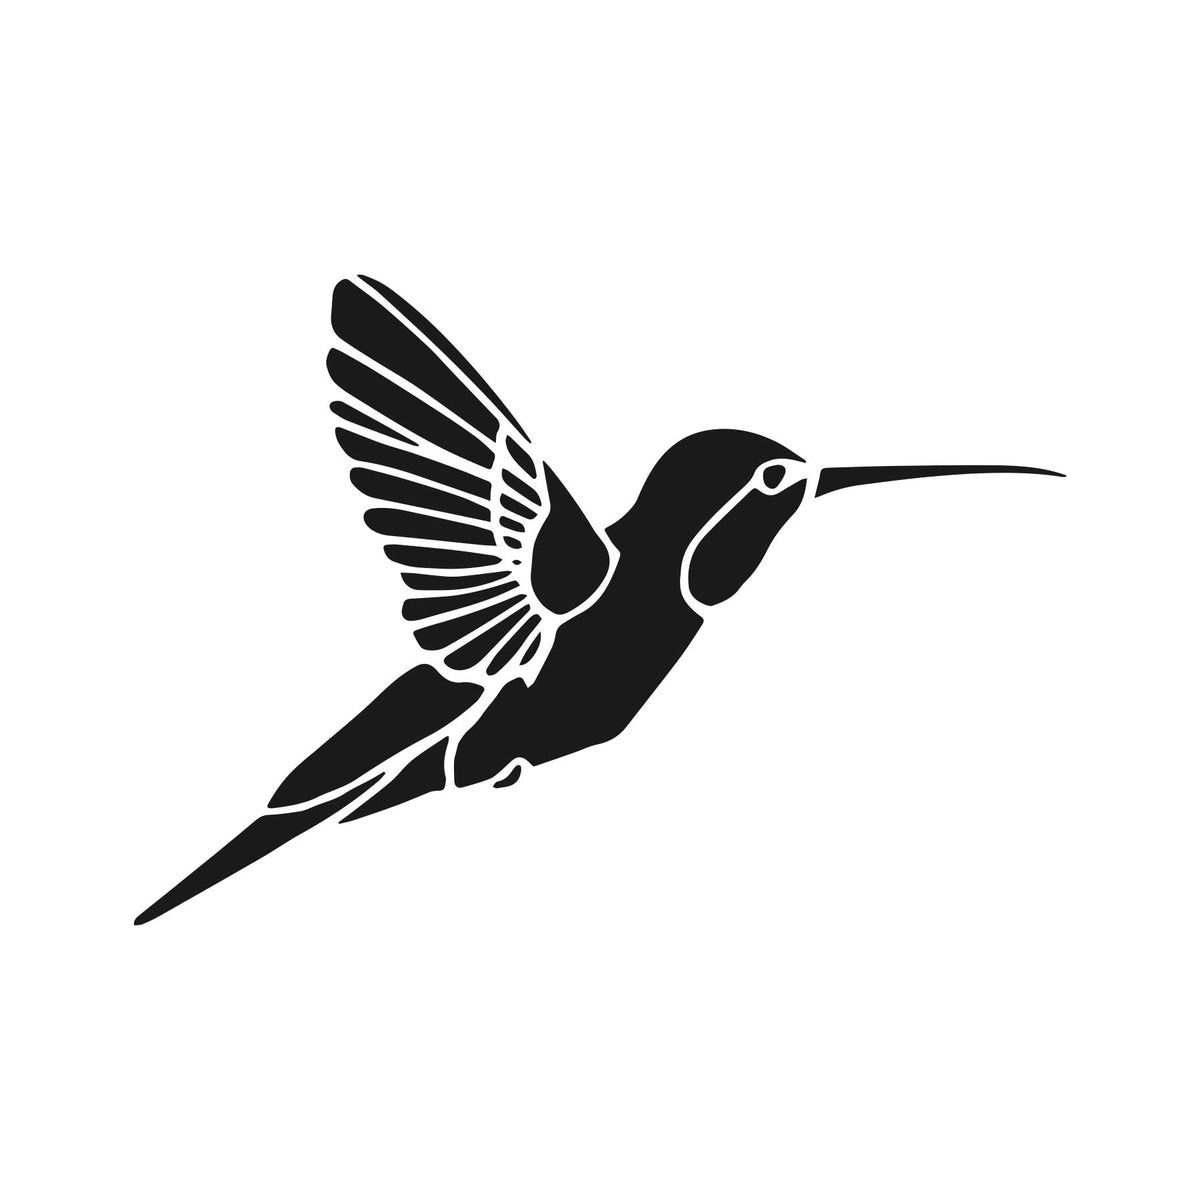 Hummingbird Vinyl Sticker Graphic Decal - Ragged Apparel Screen Printing and Signs - www.nmshirts.com